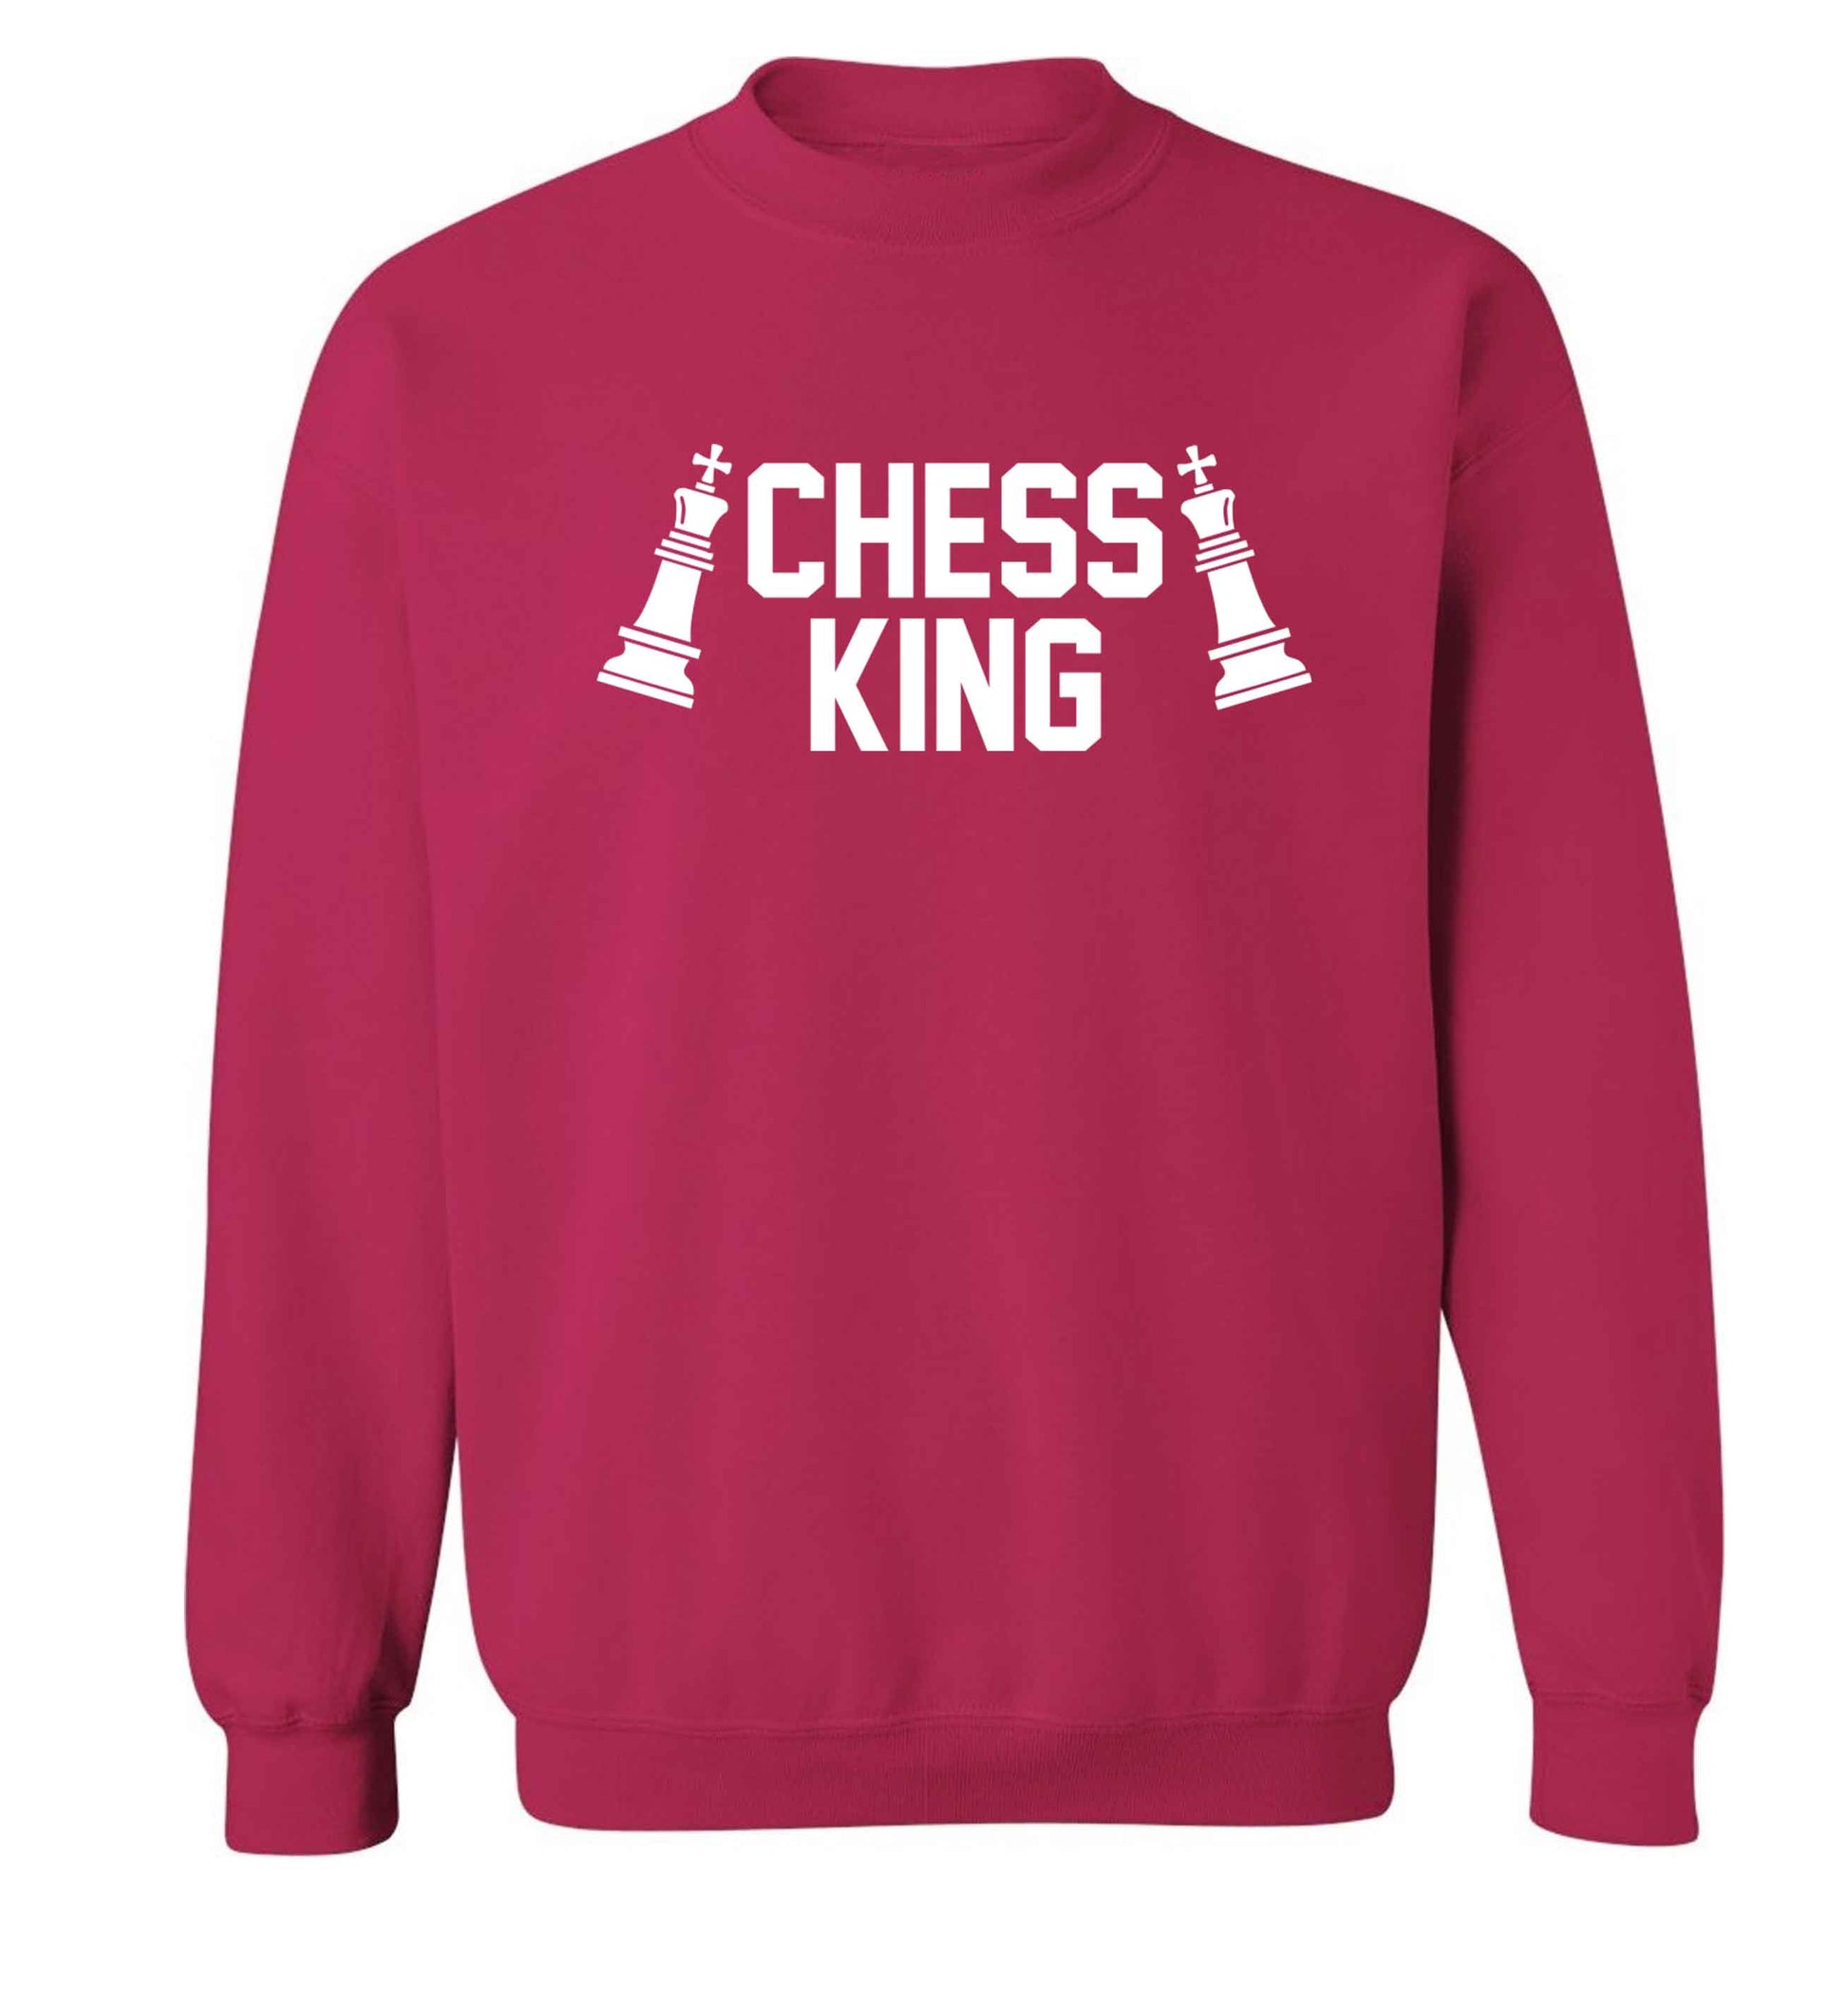 Chess king Adult's unisex pink Sweater 2XL